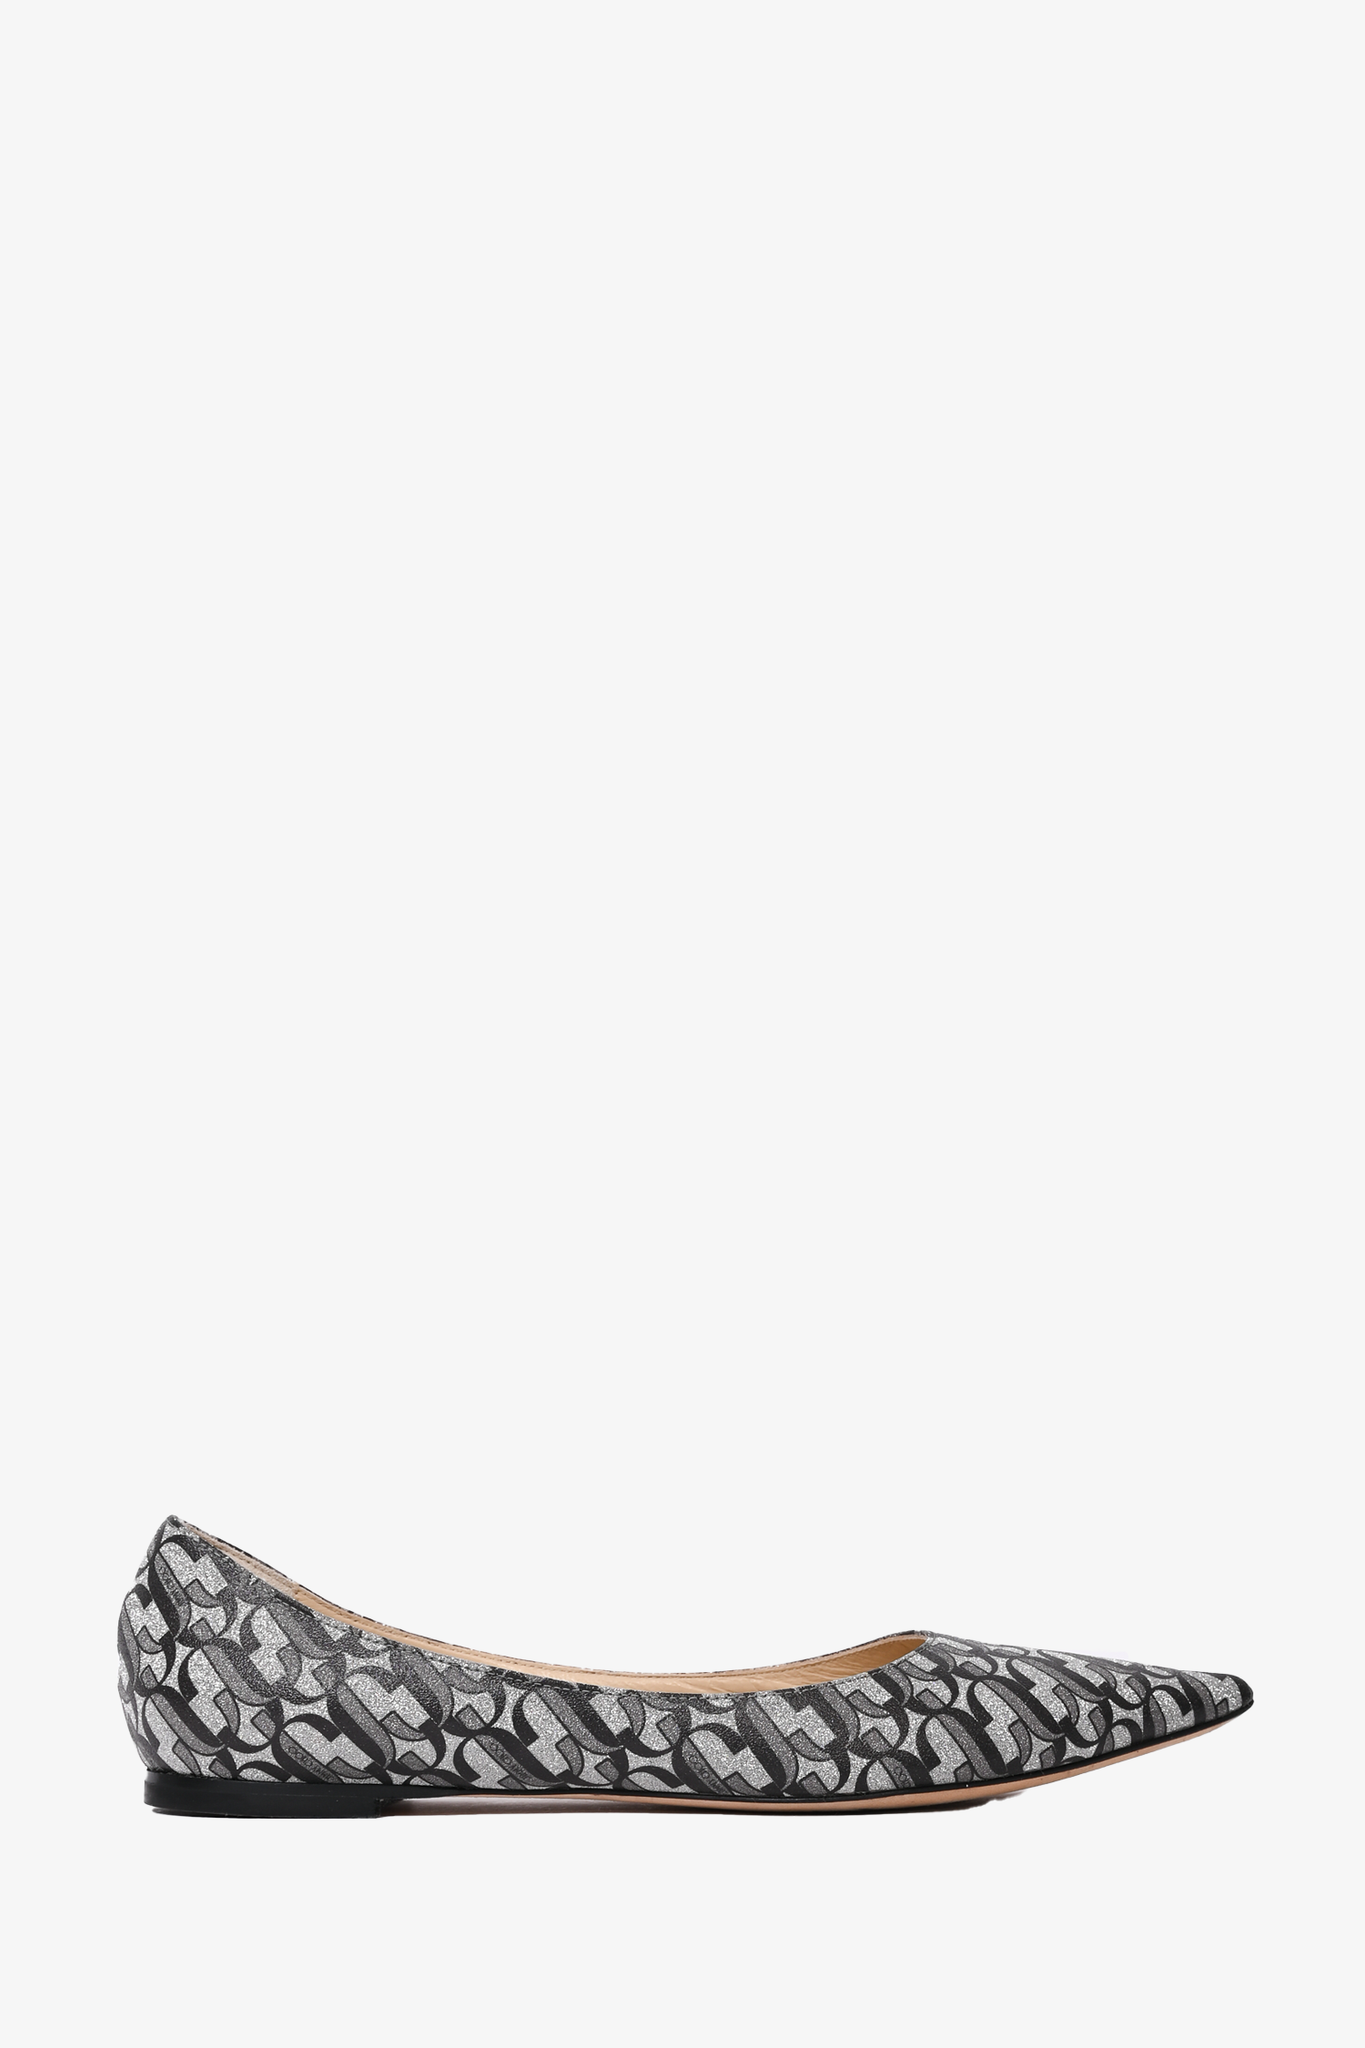 Jimmy Choo Silver Glitter Patterned Pointed Flats Size 37.5